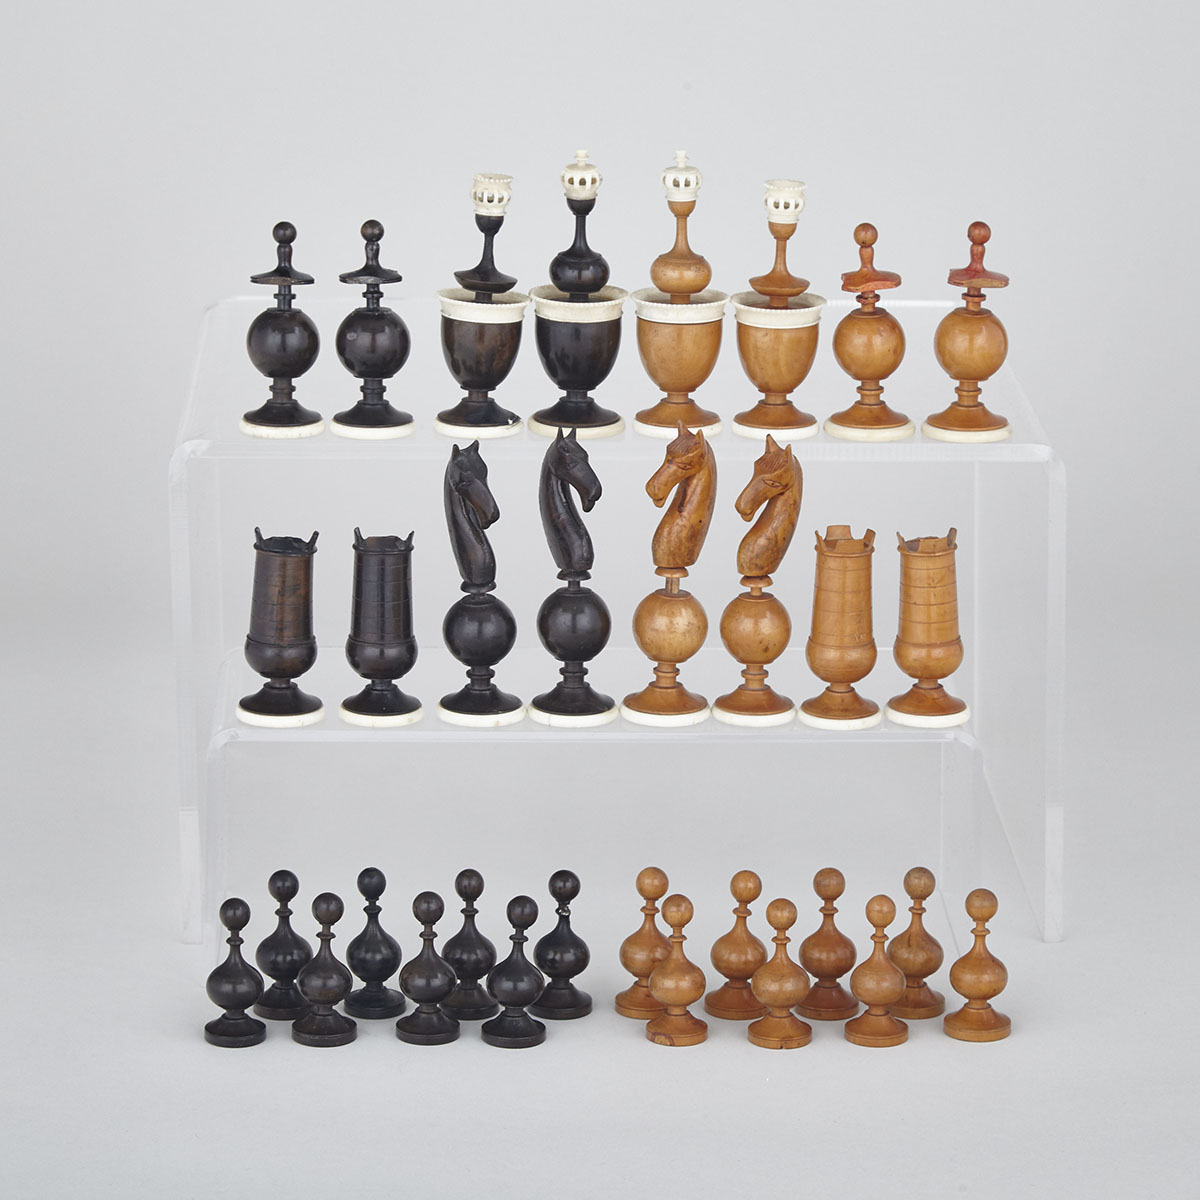 French Ivory Mounted Boxwood ‘Directoire’ Chess Set, late 18th/early 19th century